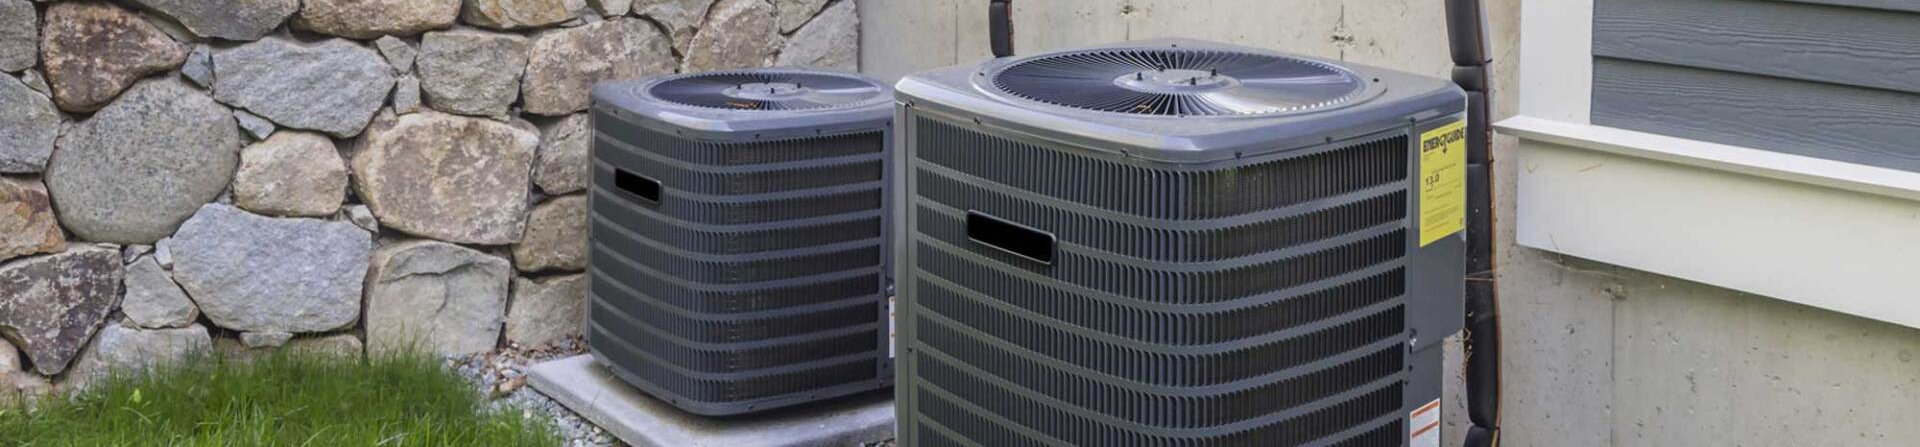 Air conditioning Units behind home